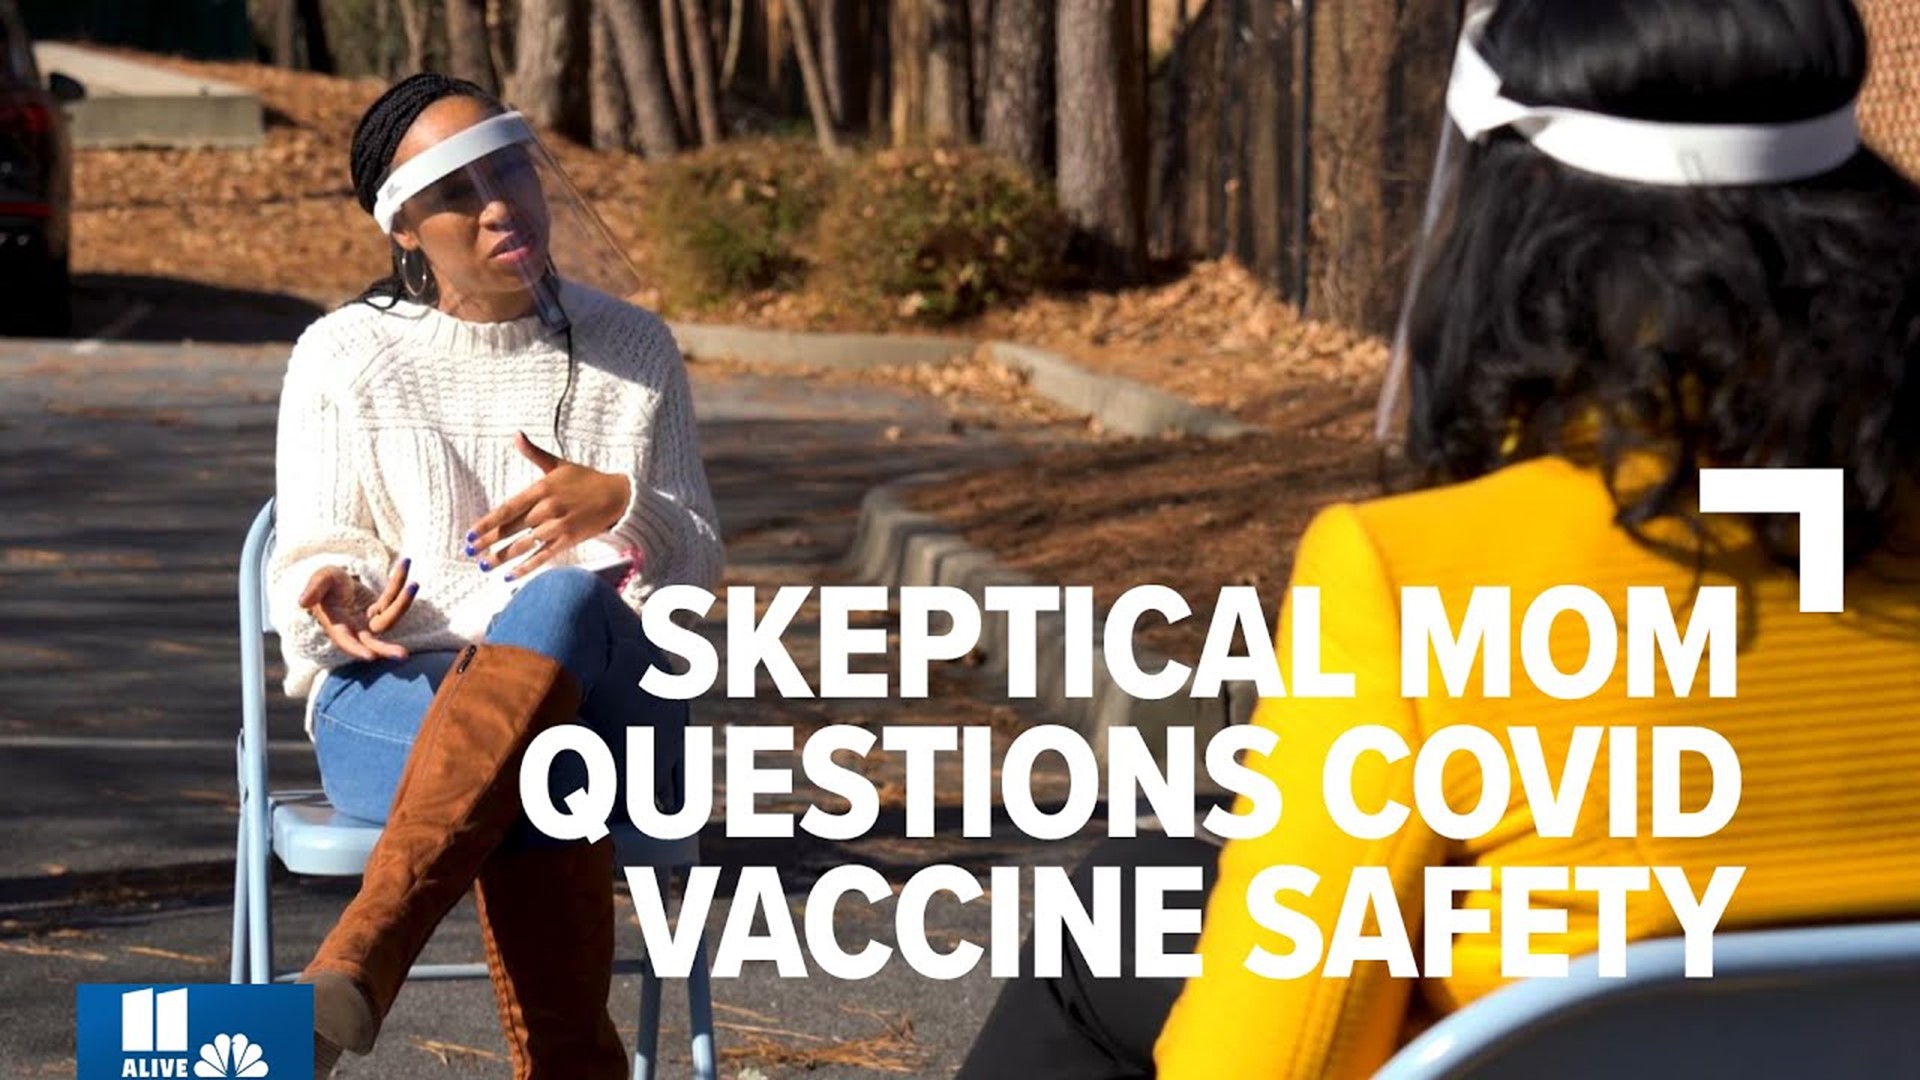 The vaccine-hesitant mom interviews four experts and gets answers to all of her questions about the safety of the COVID-19 vaccines and other concerns.